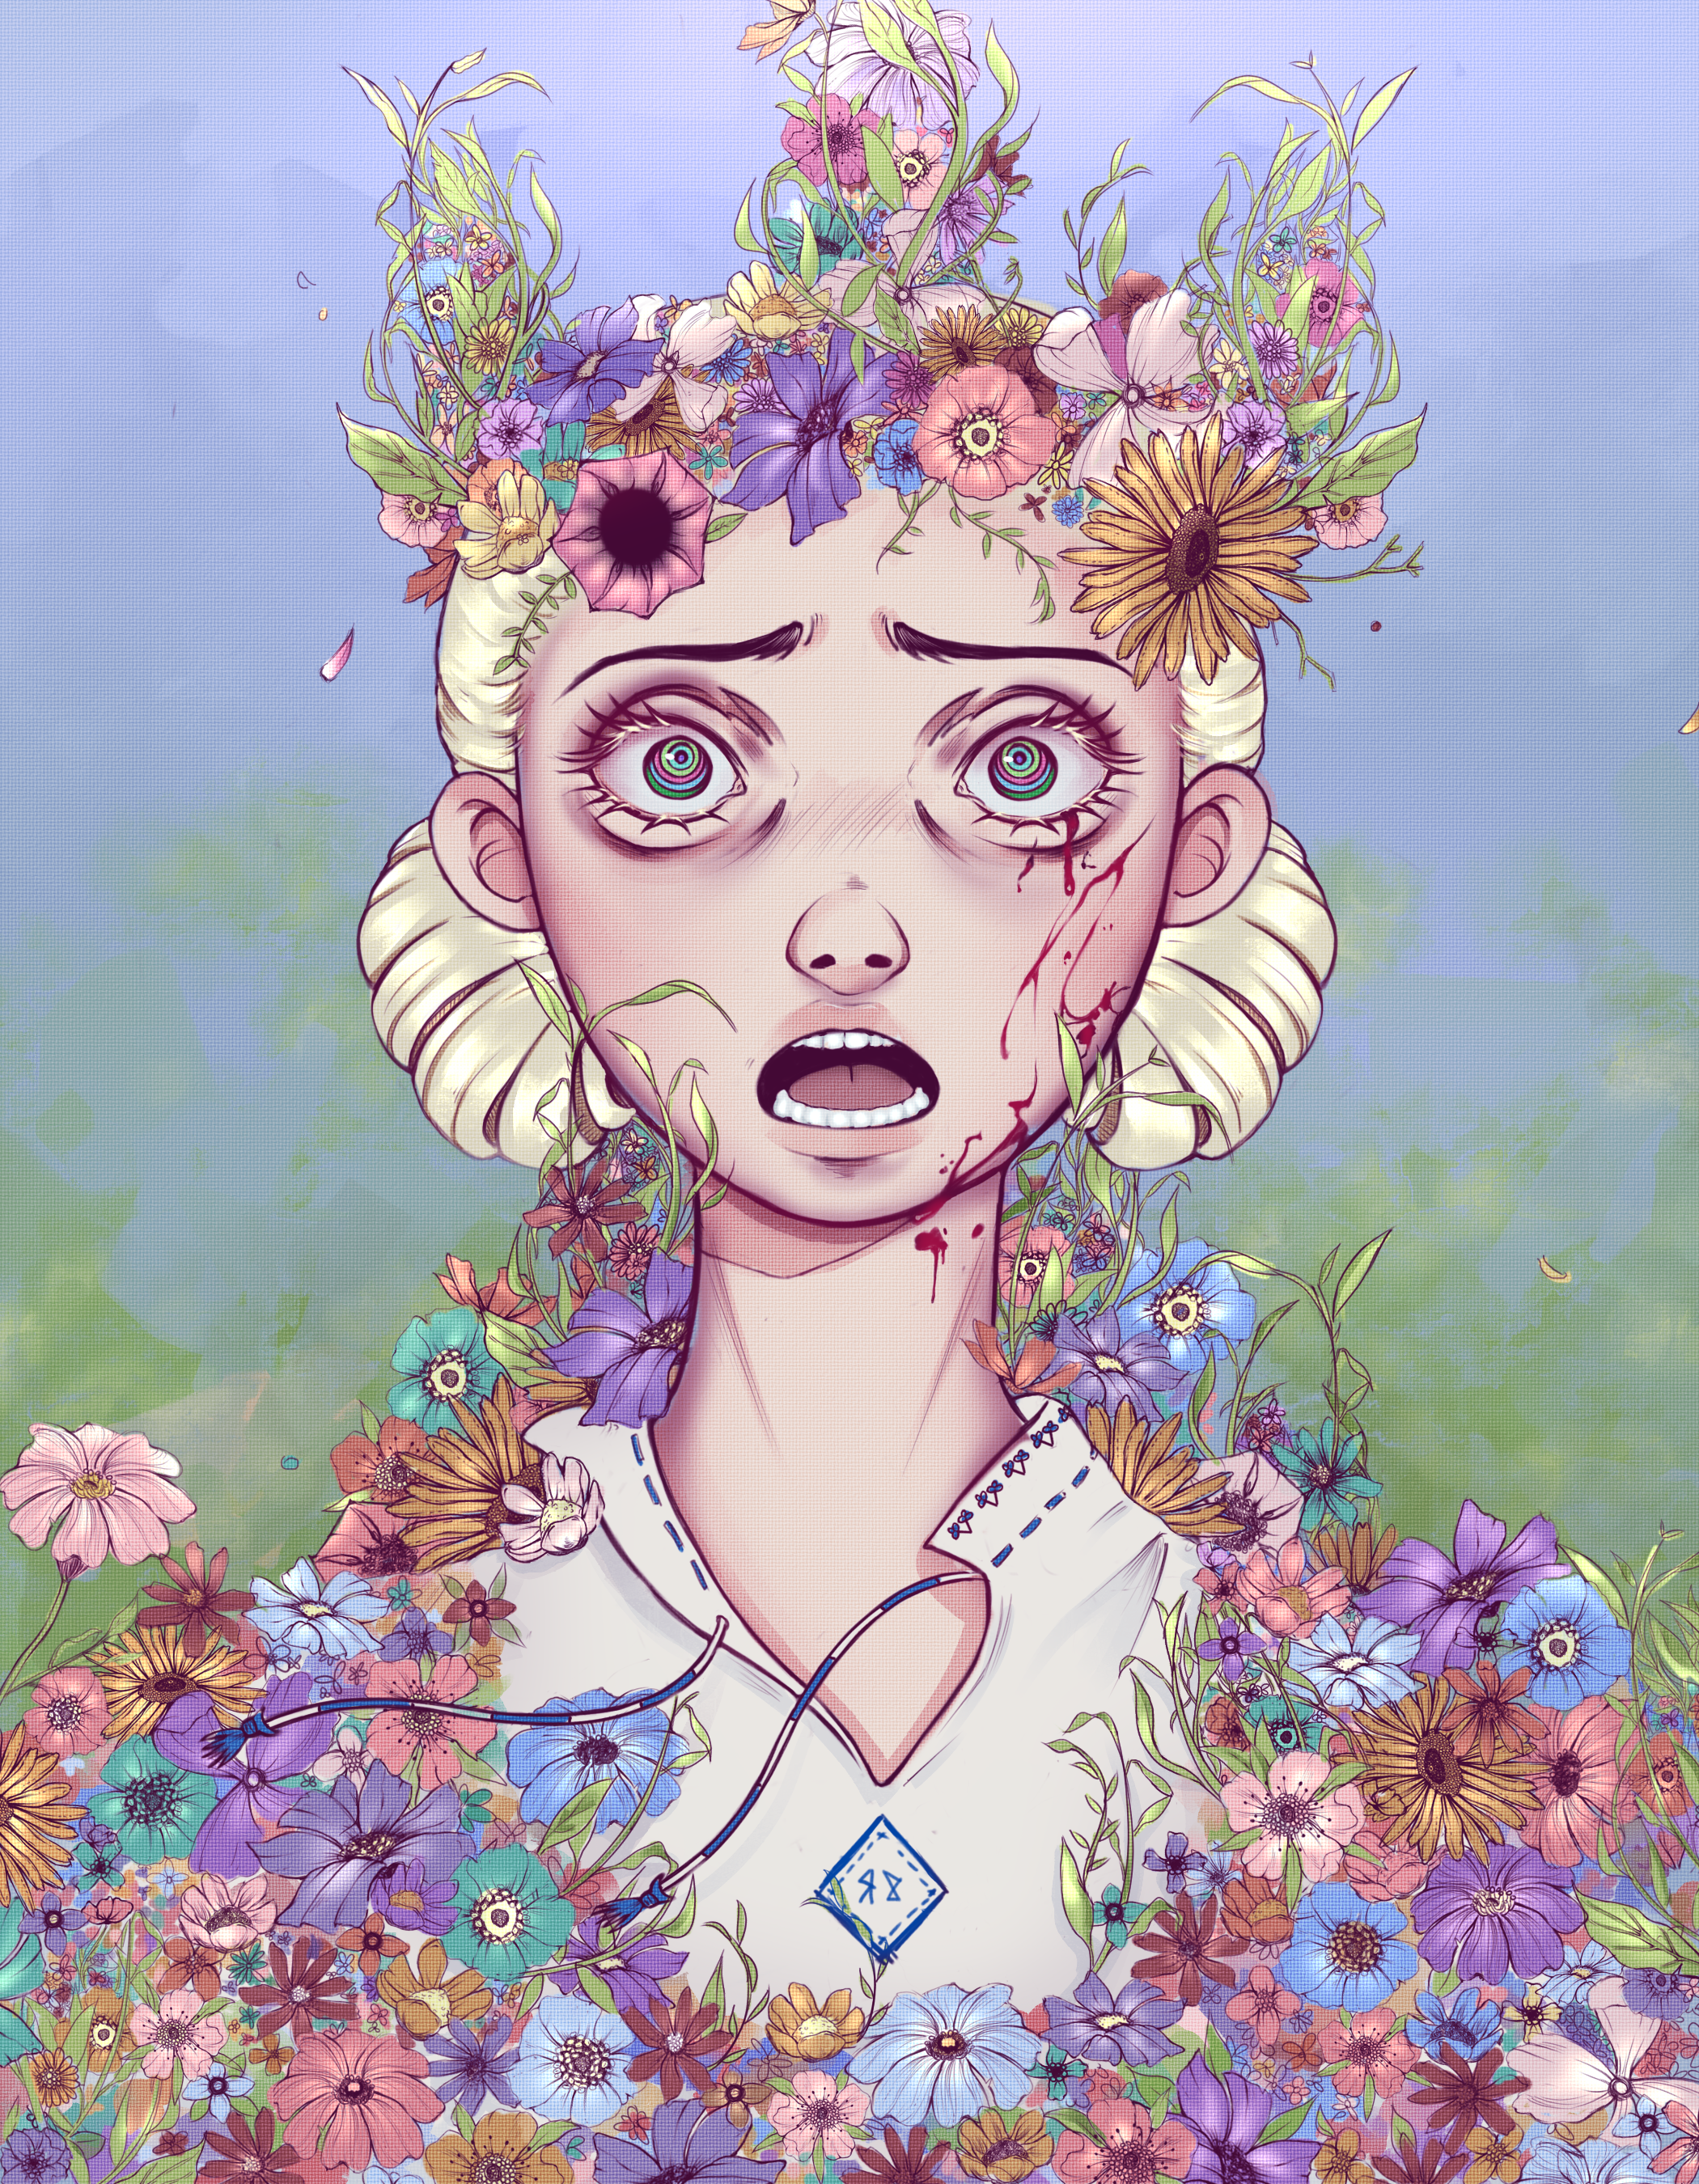 Digital art of a distressed woman covered in flowers